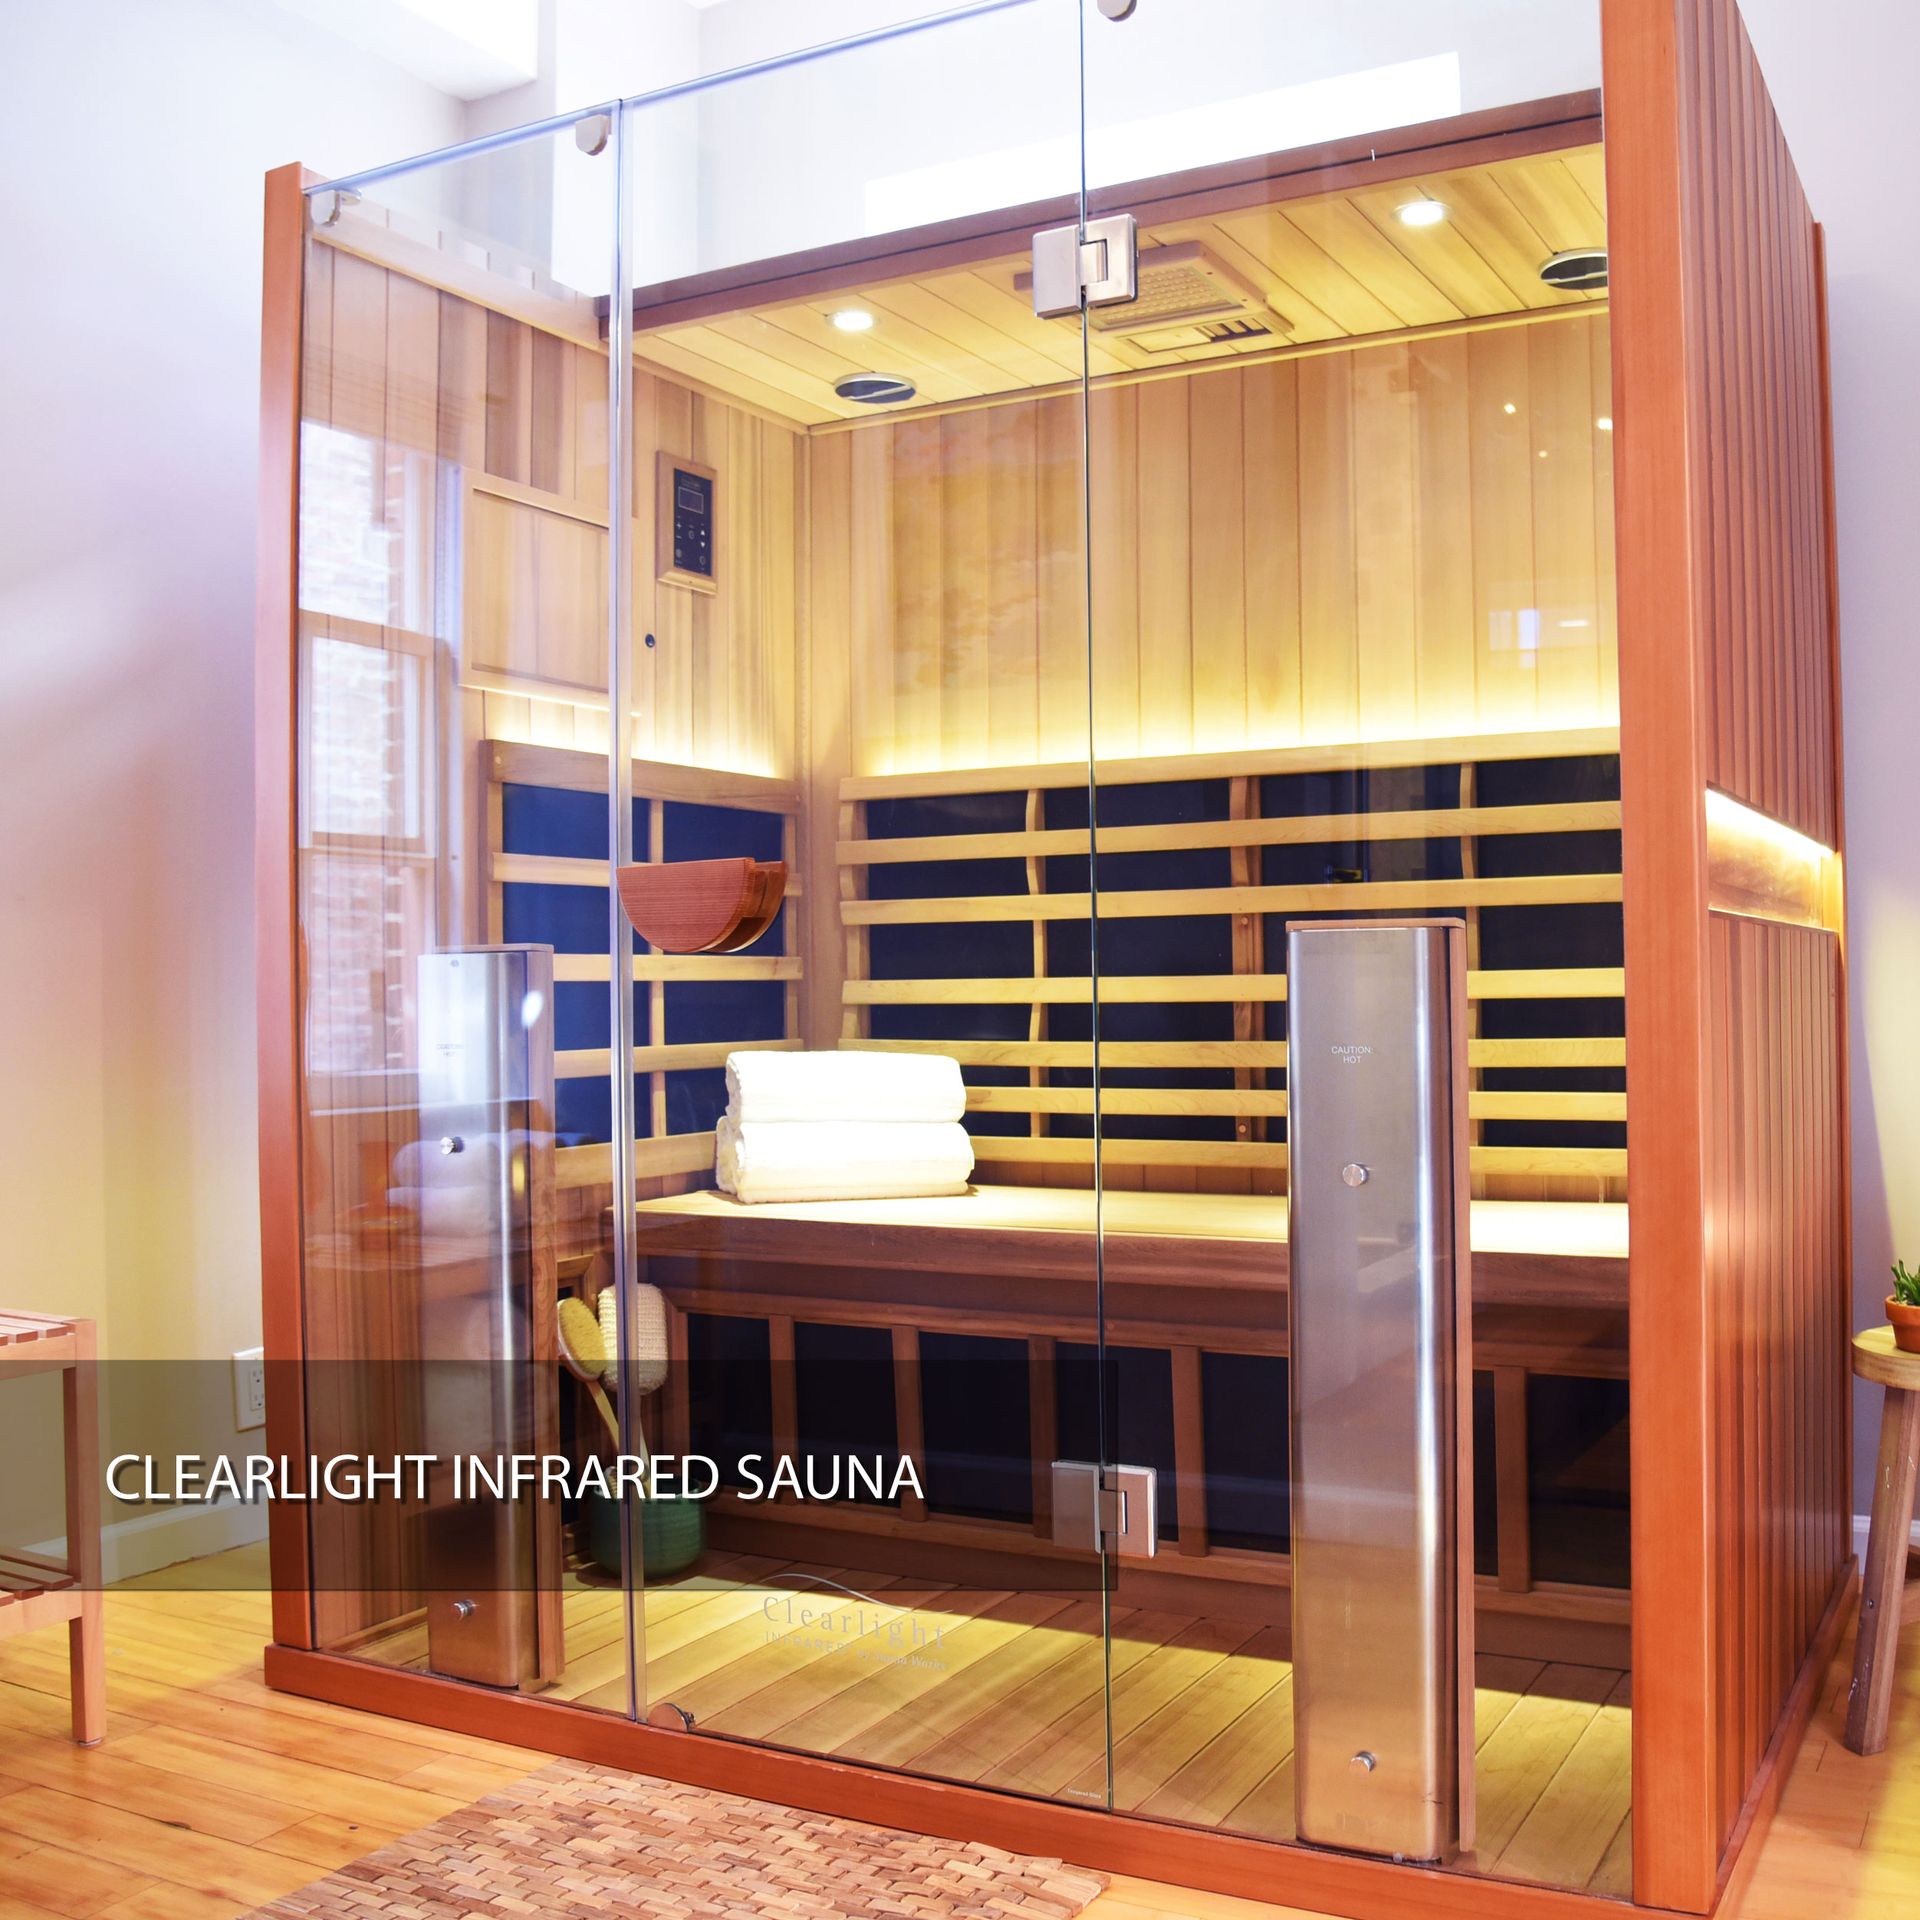 Finish Your Dry Cold Plunge in Our Infrared Sauna